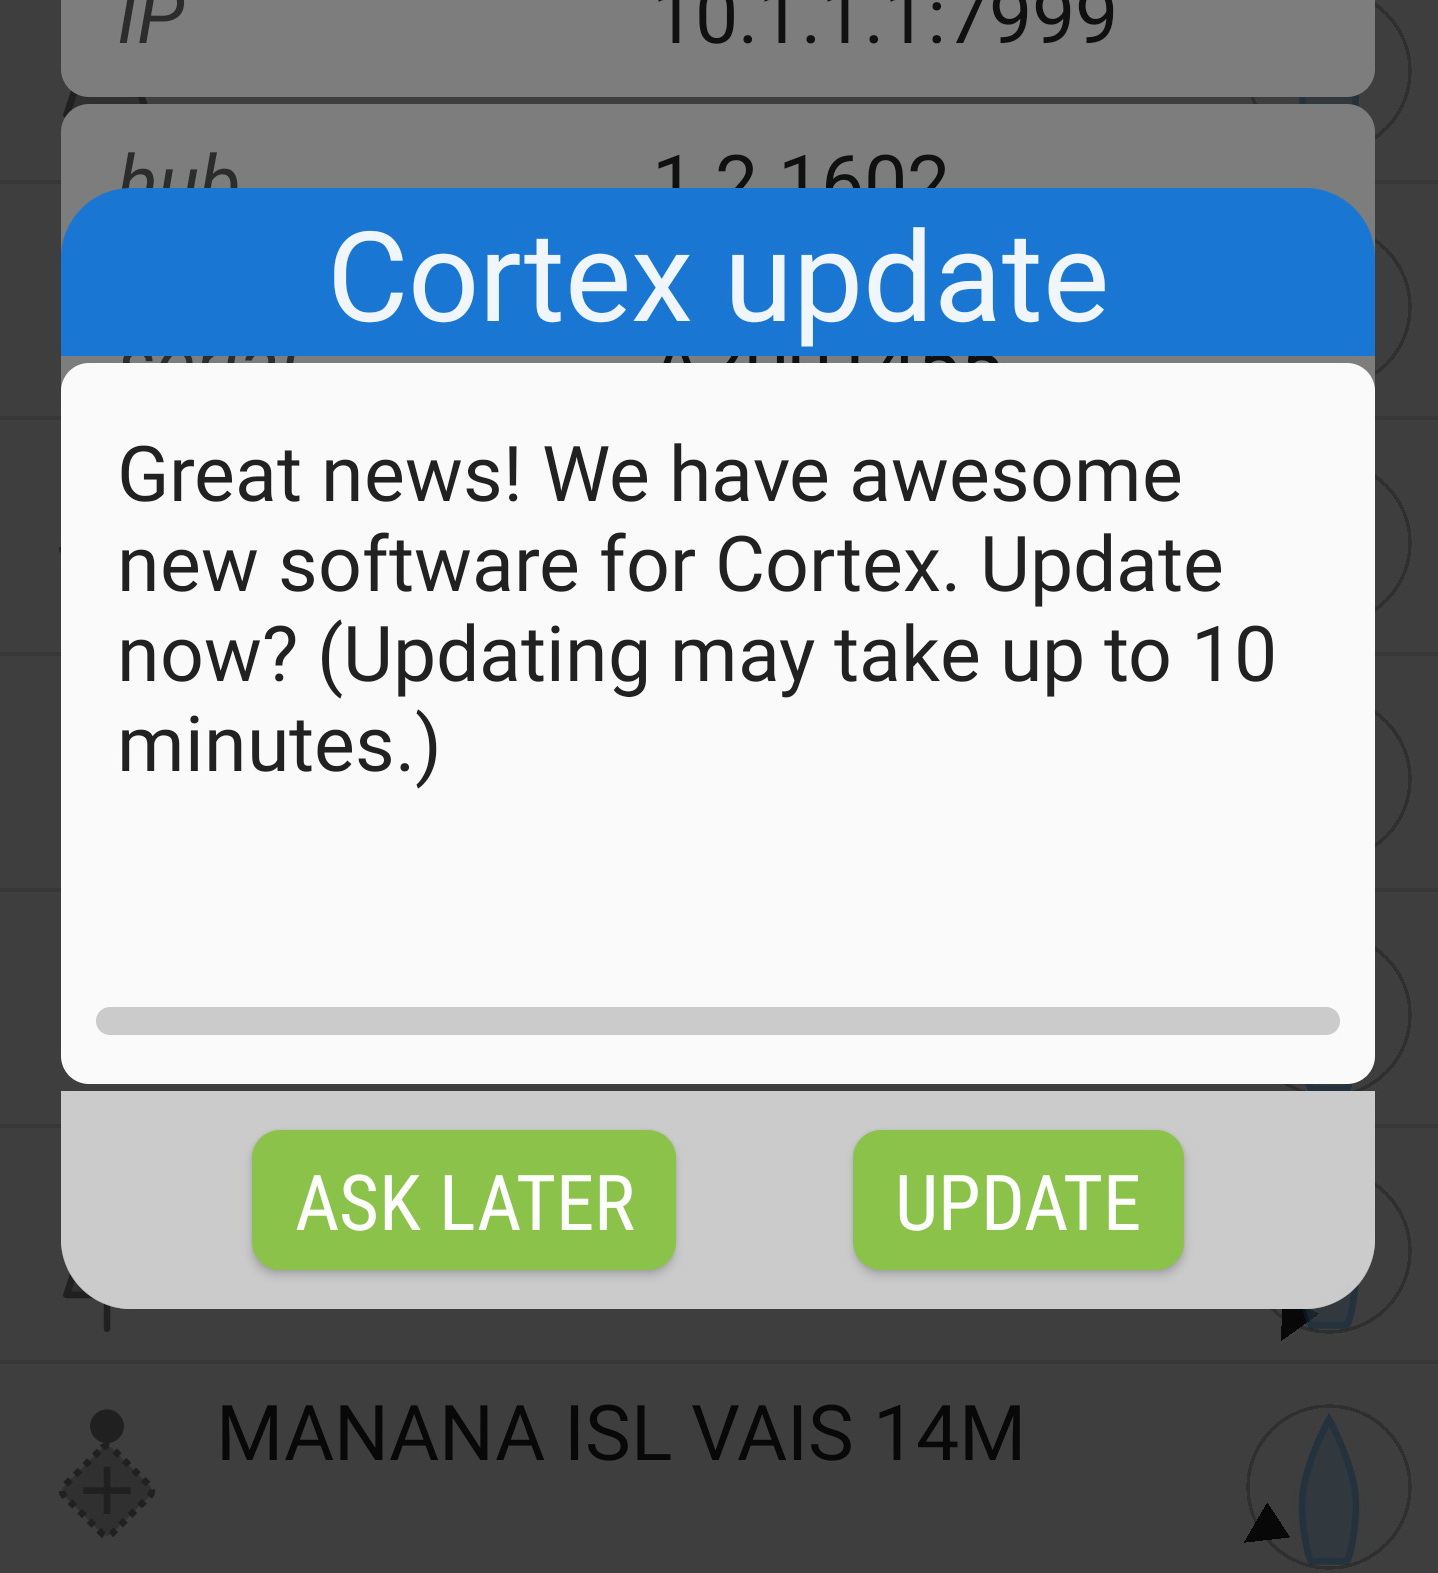 Cortex hardware updates are semi automated with Cortex Onboard app